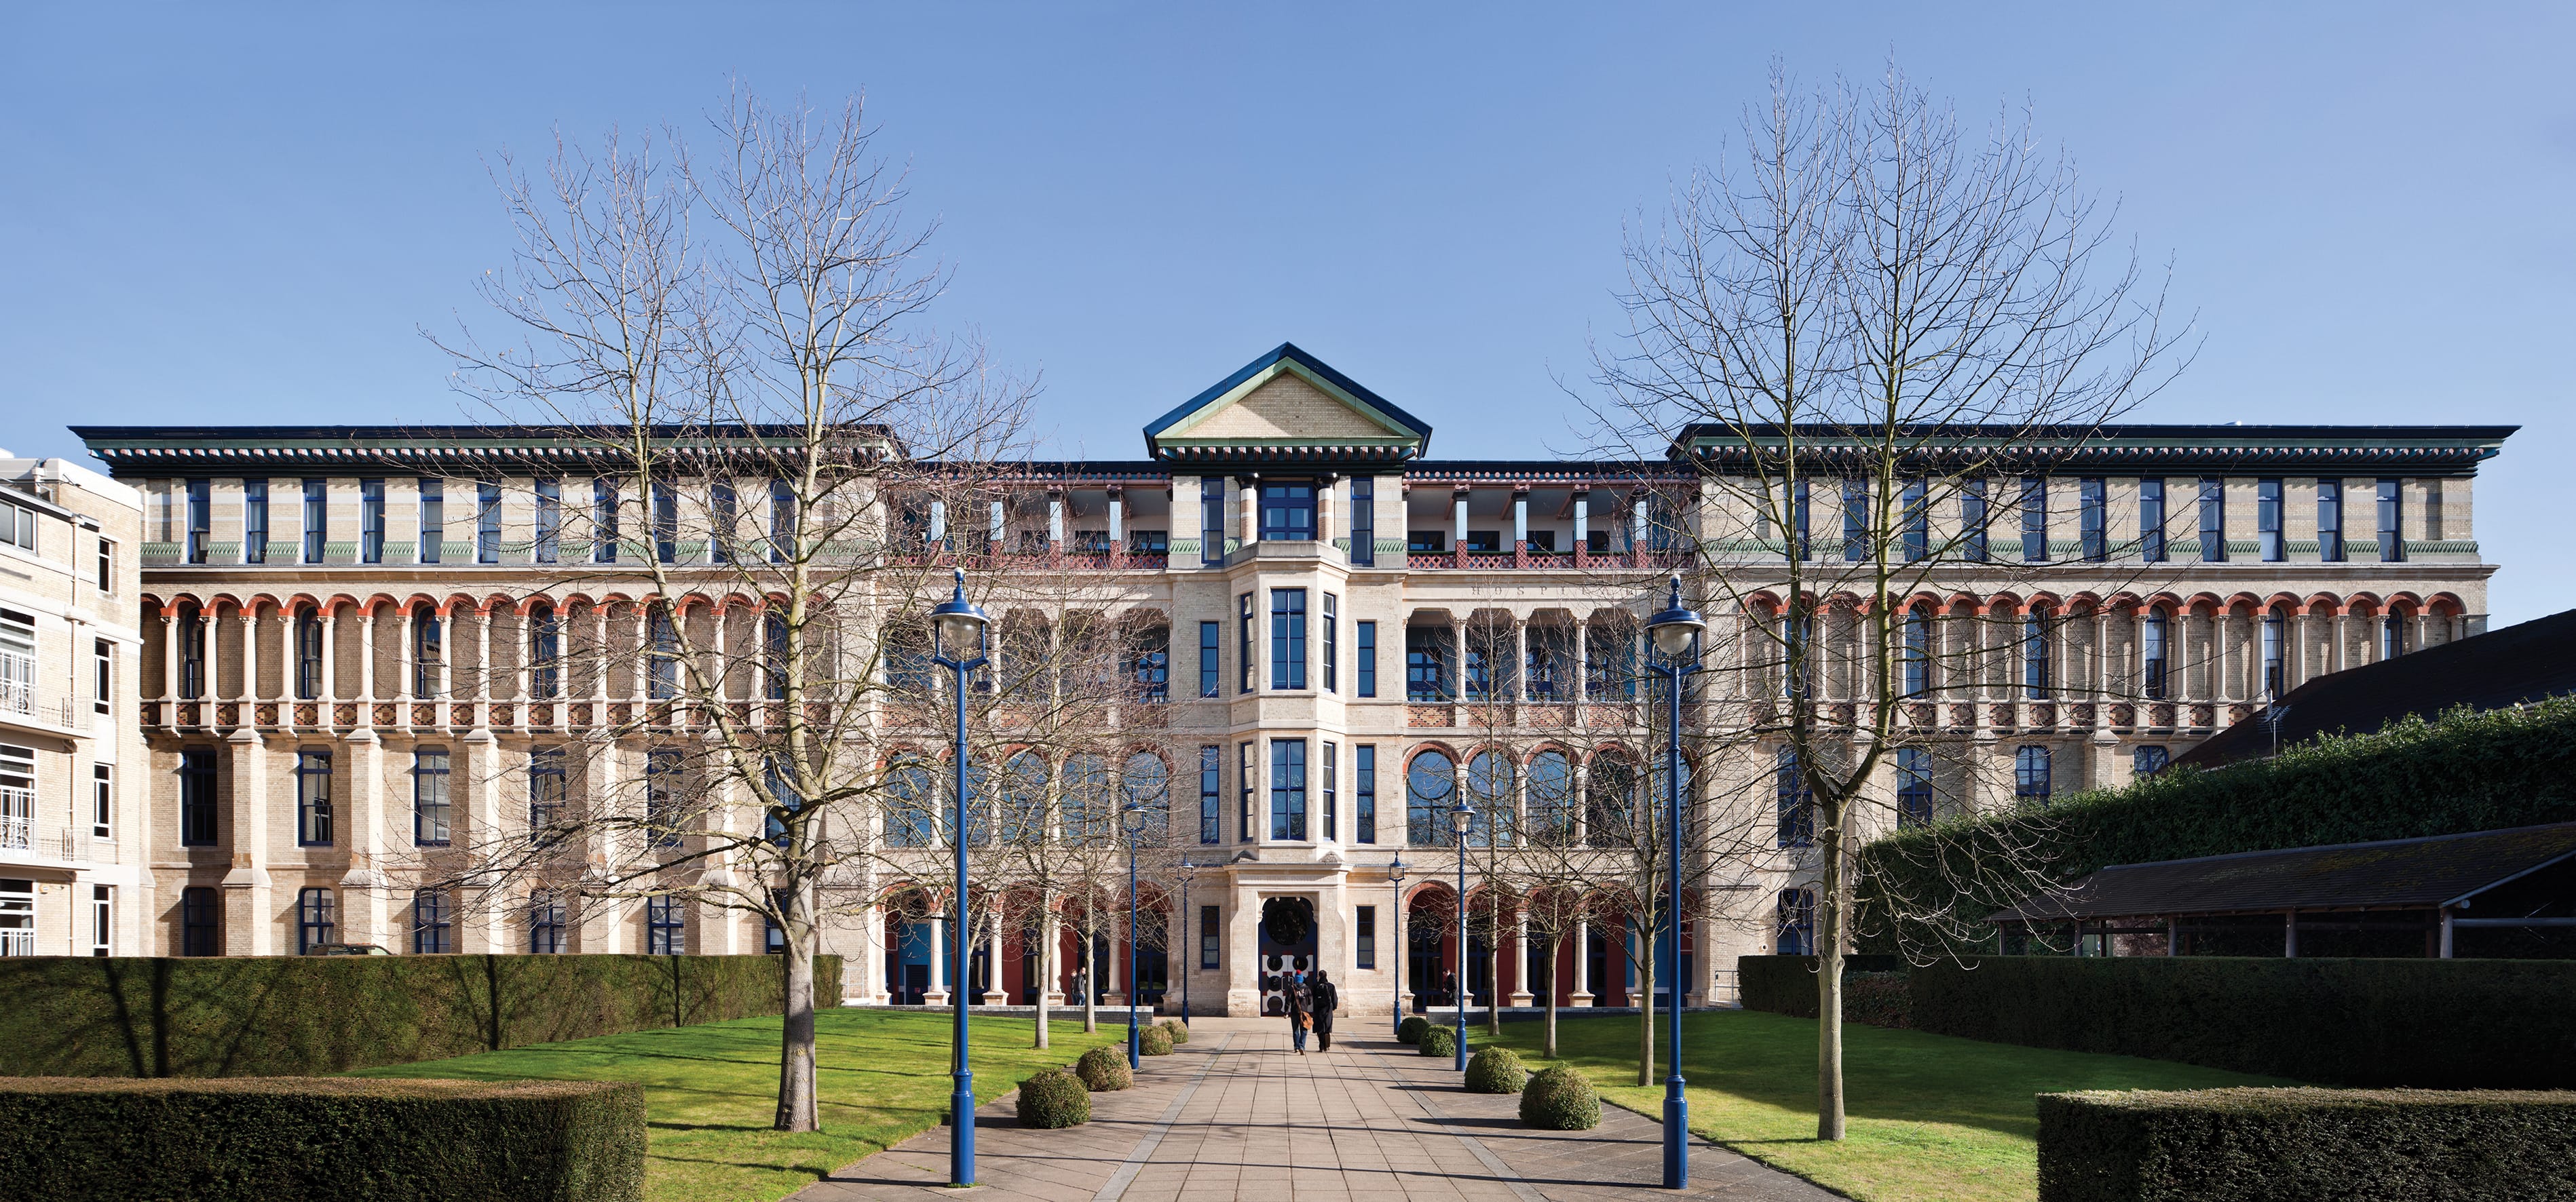  Cambridge Judge Business School is one of the top business colleges in Cambridge